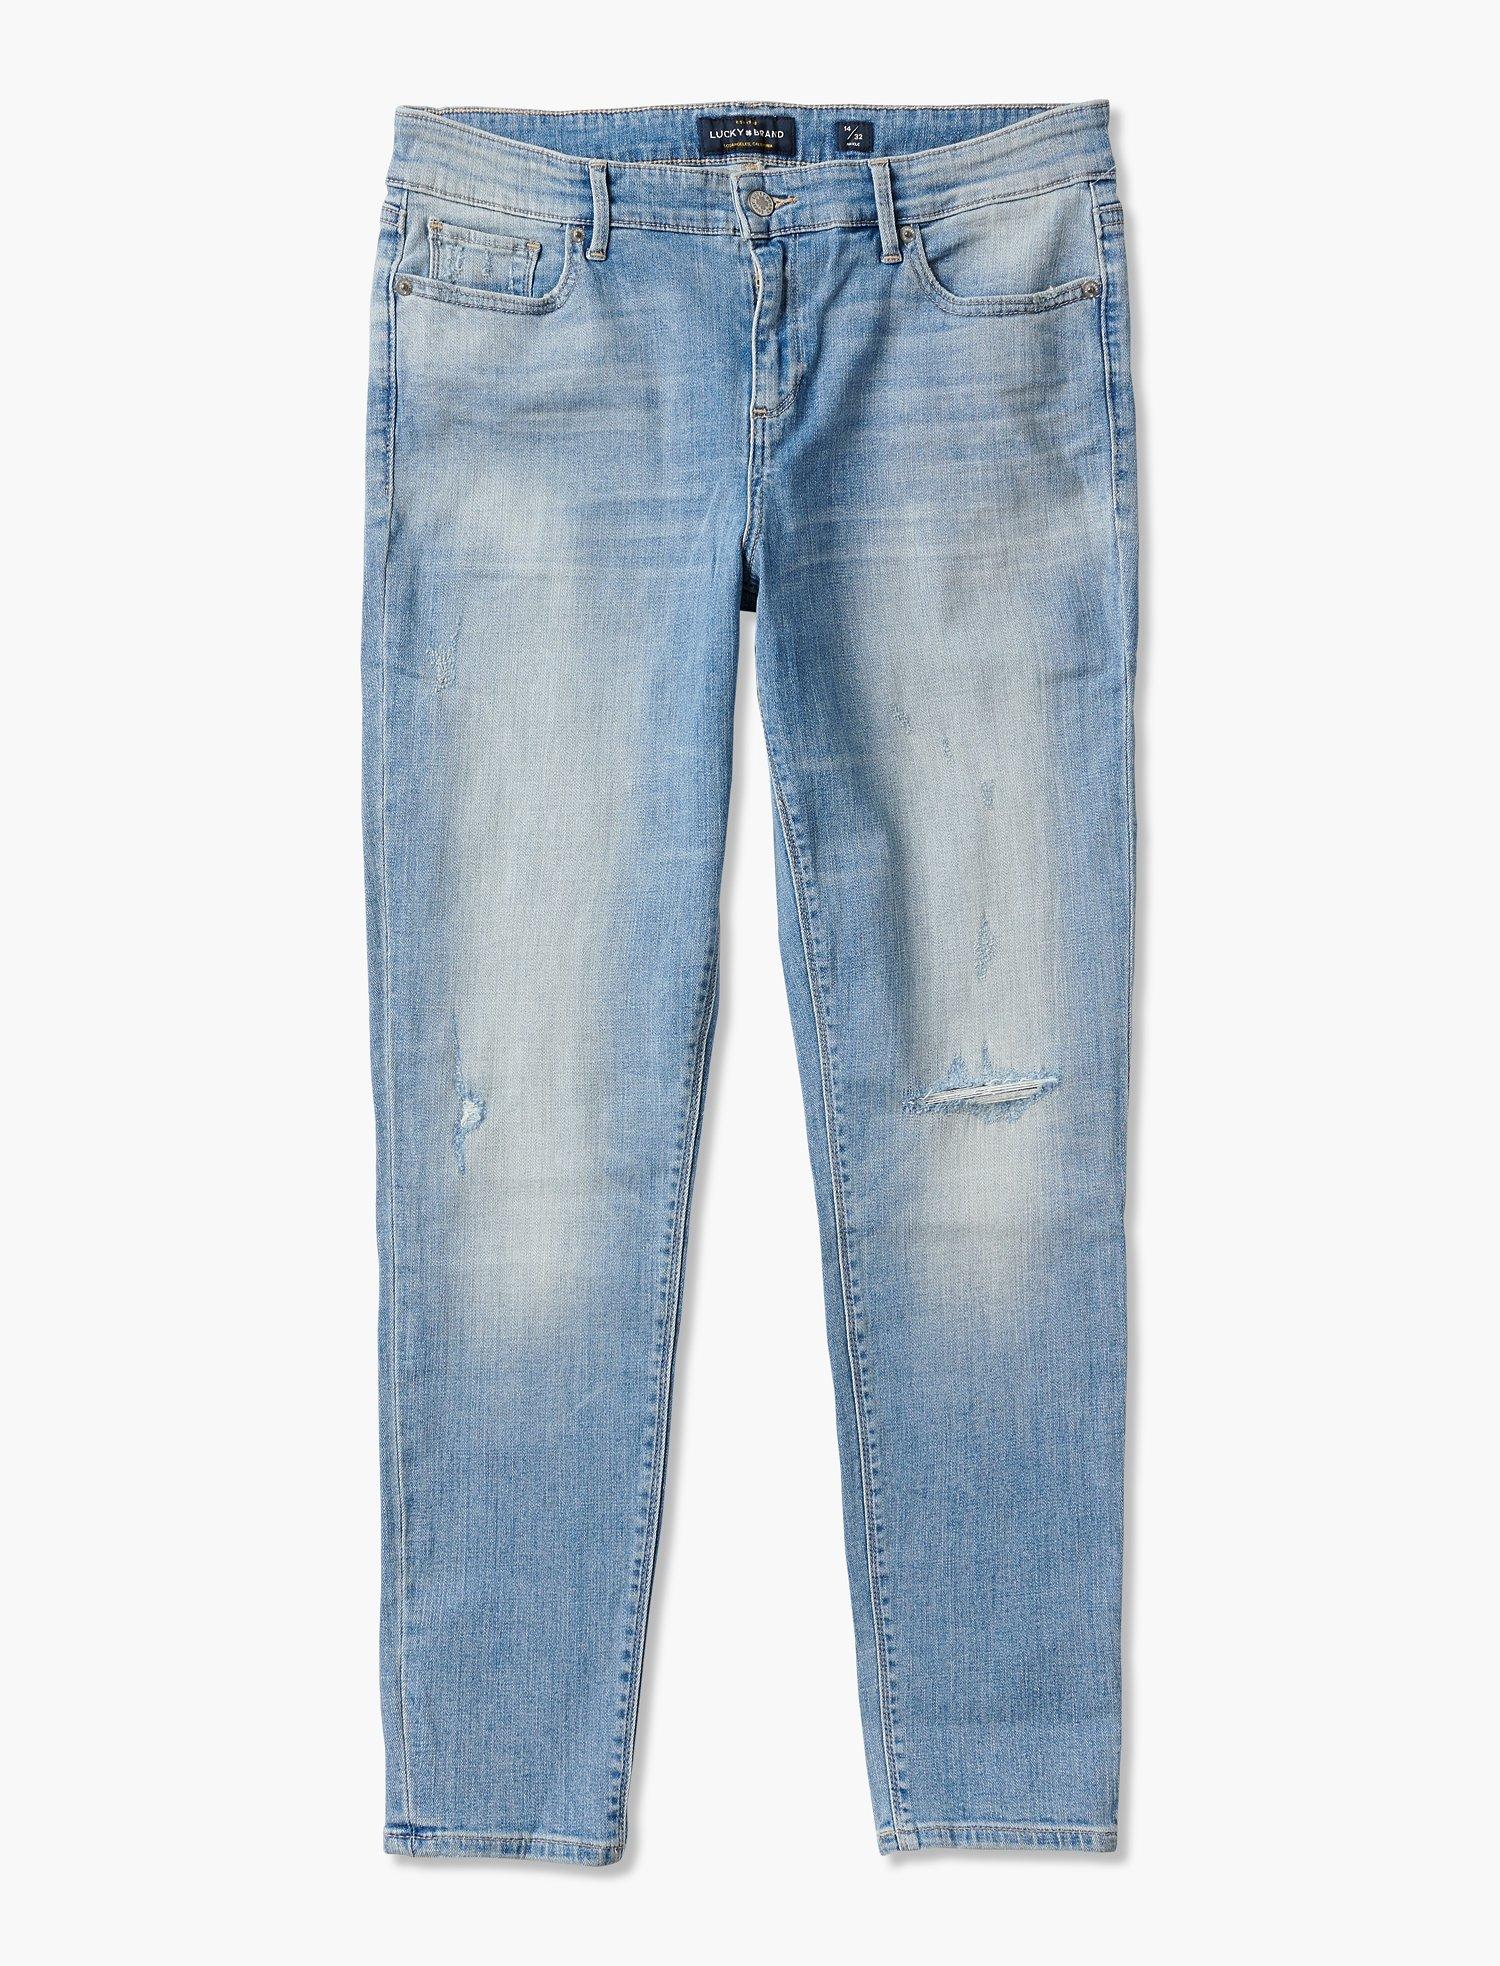 STELLA LOW RISE SKINNY JEAN IN CRYSTAL BAY | Lucky Brand